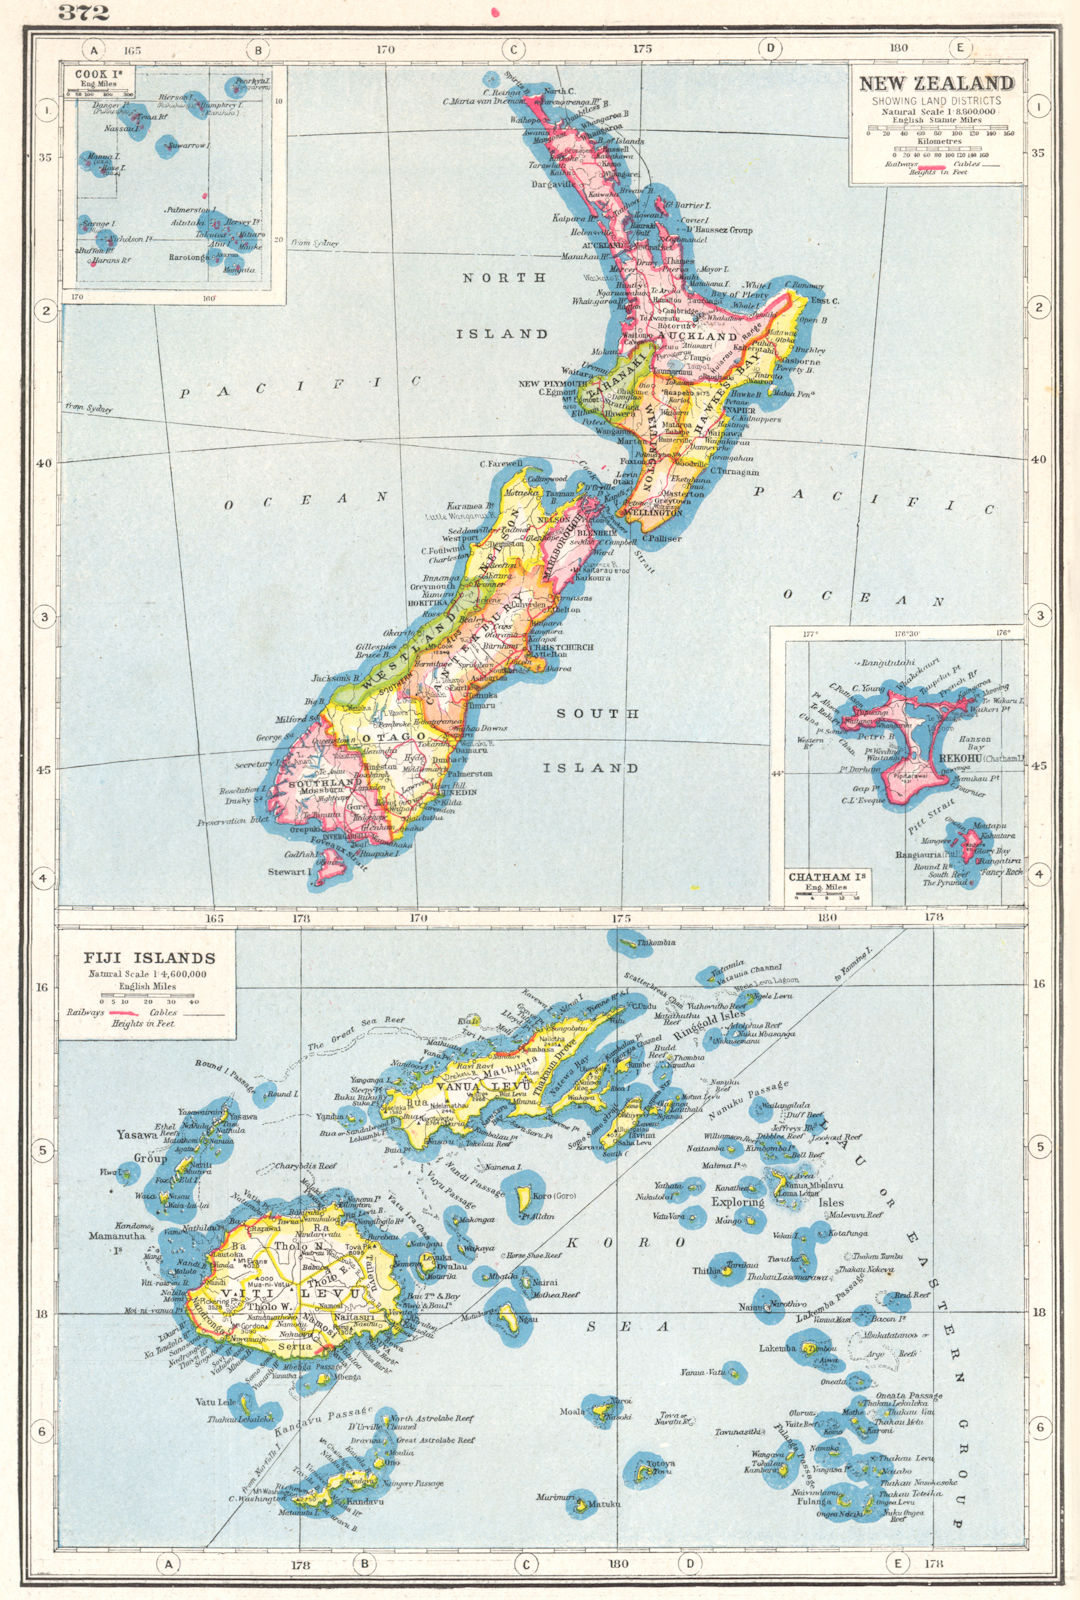 NEW ZEALAND. showing Land districts; Fiji Cook Chatham islands. Rail. 1920 map